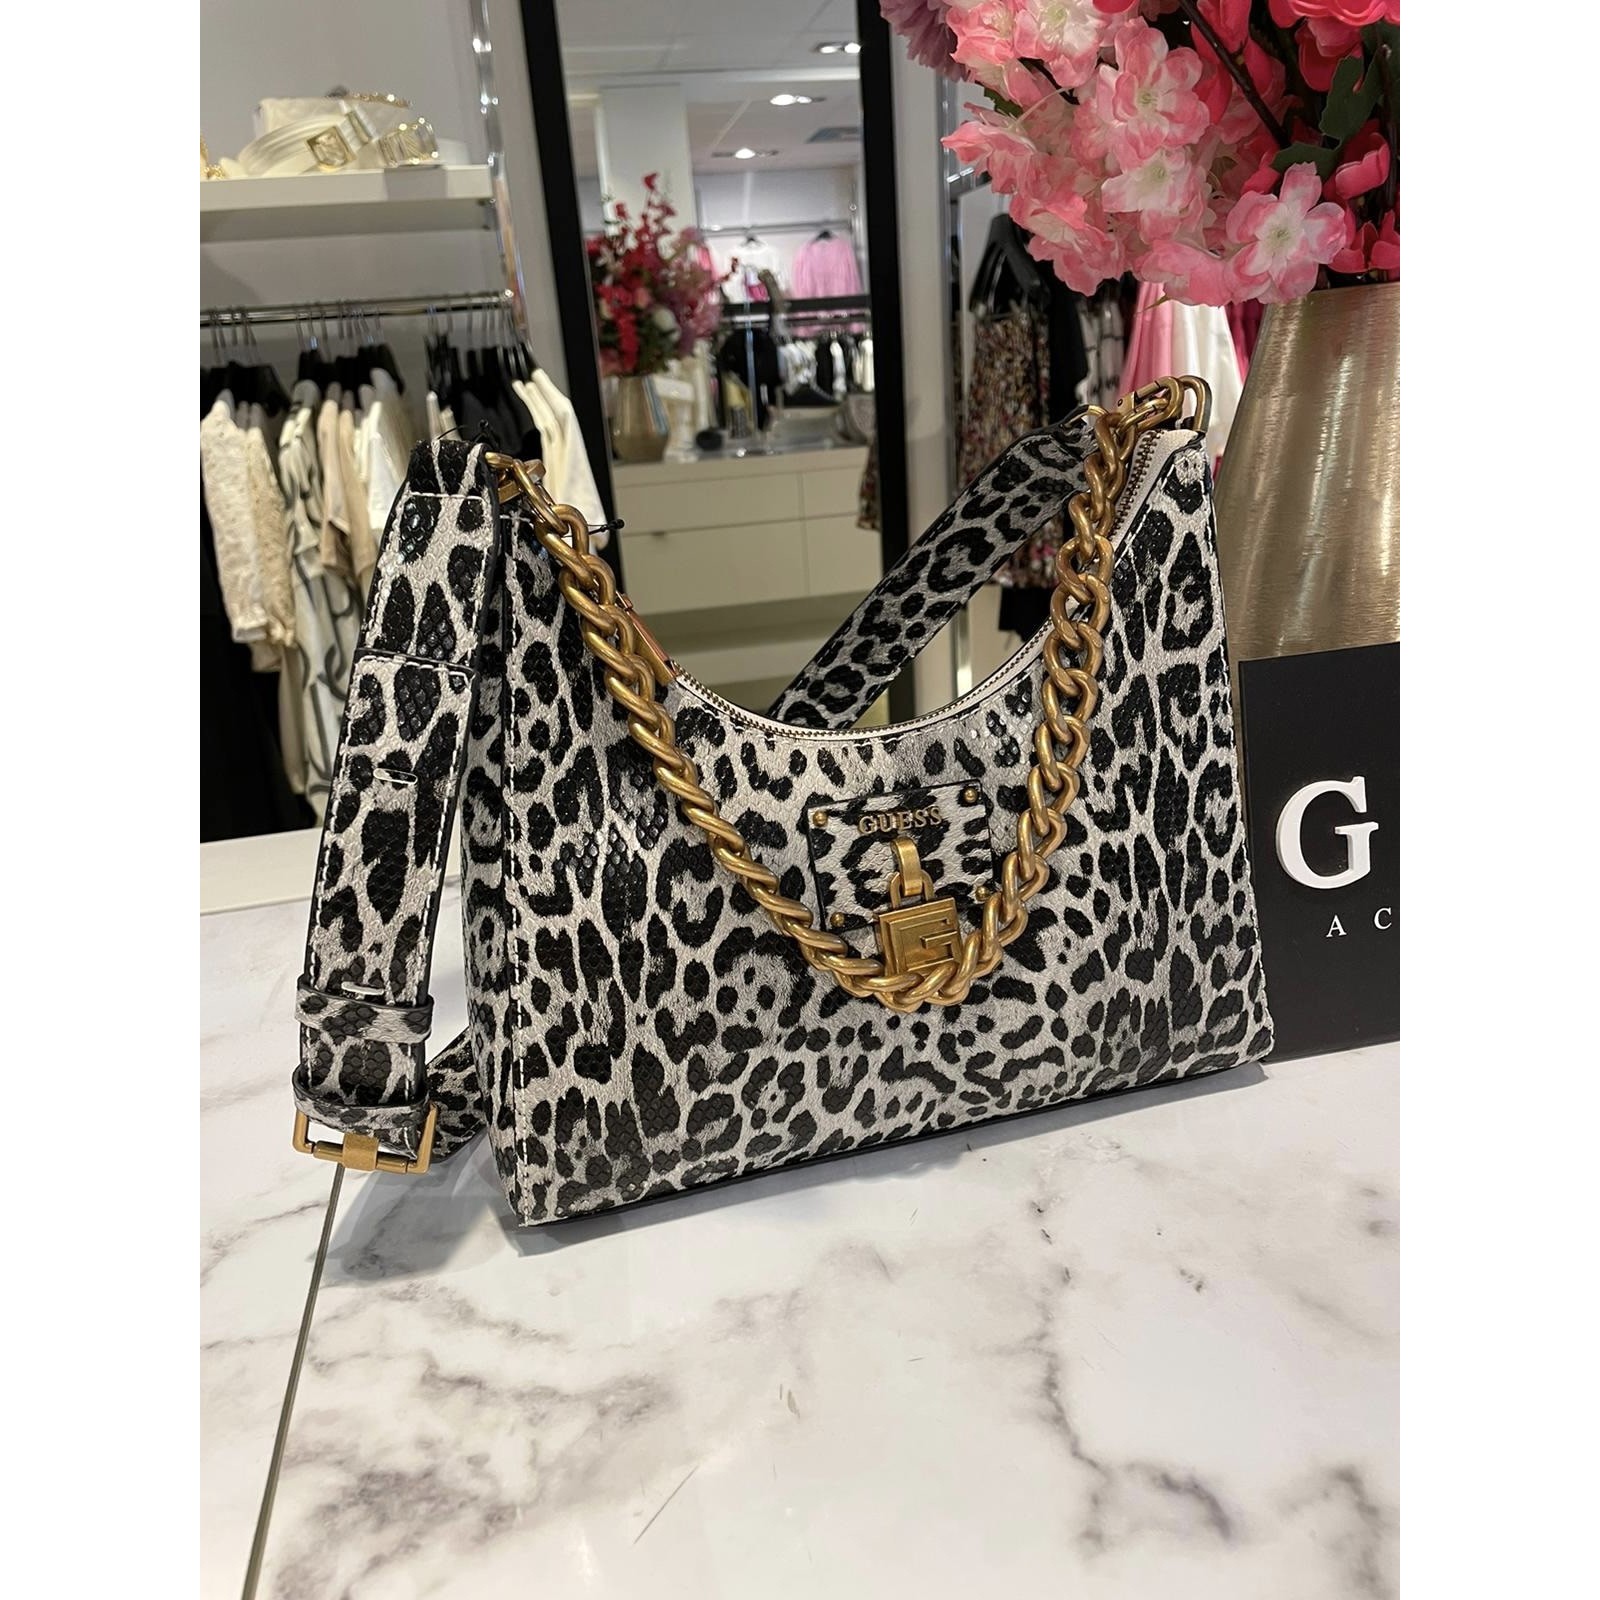 Guess Bag Centre Stage Leopard Guess